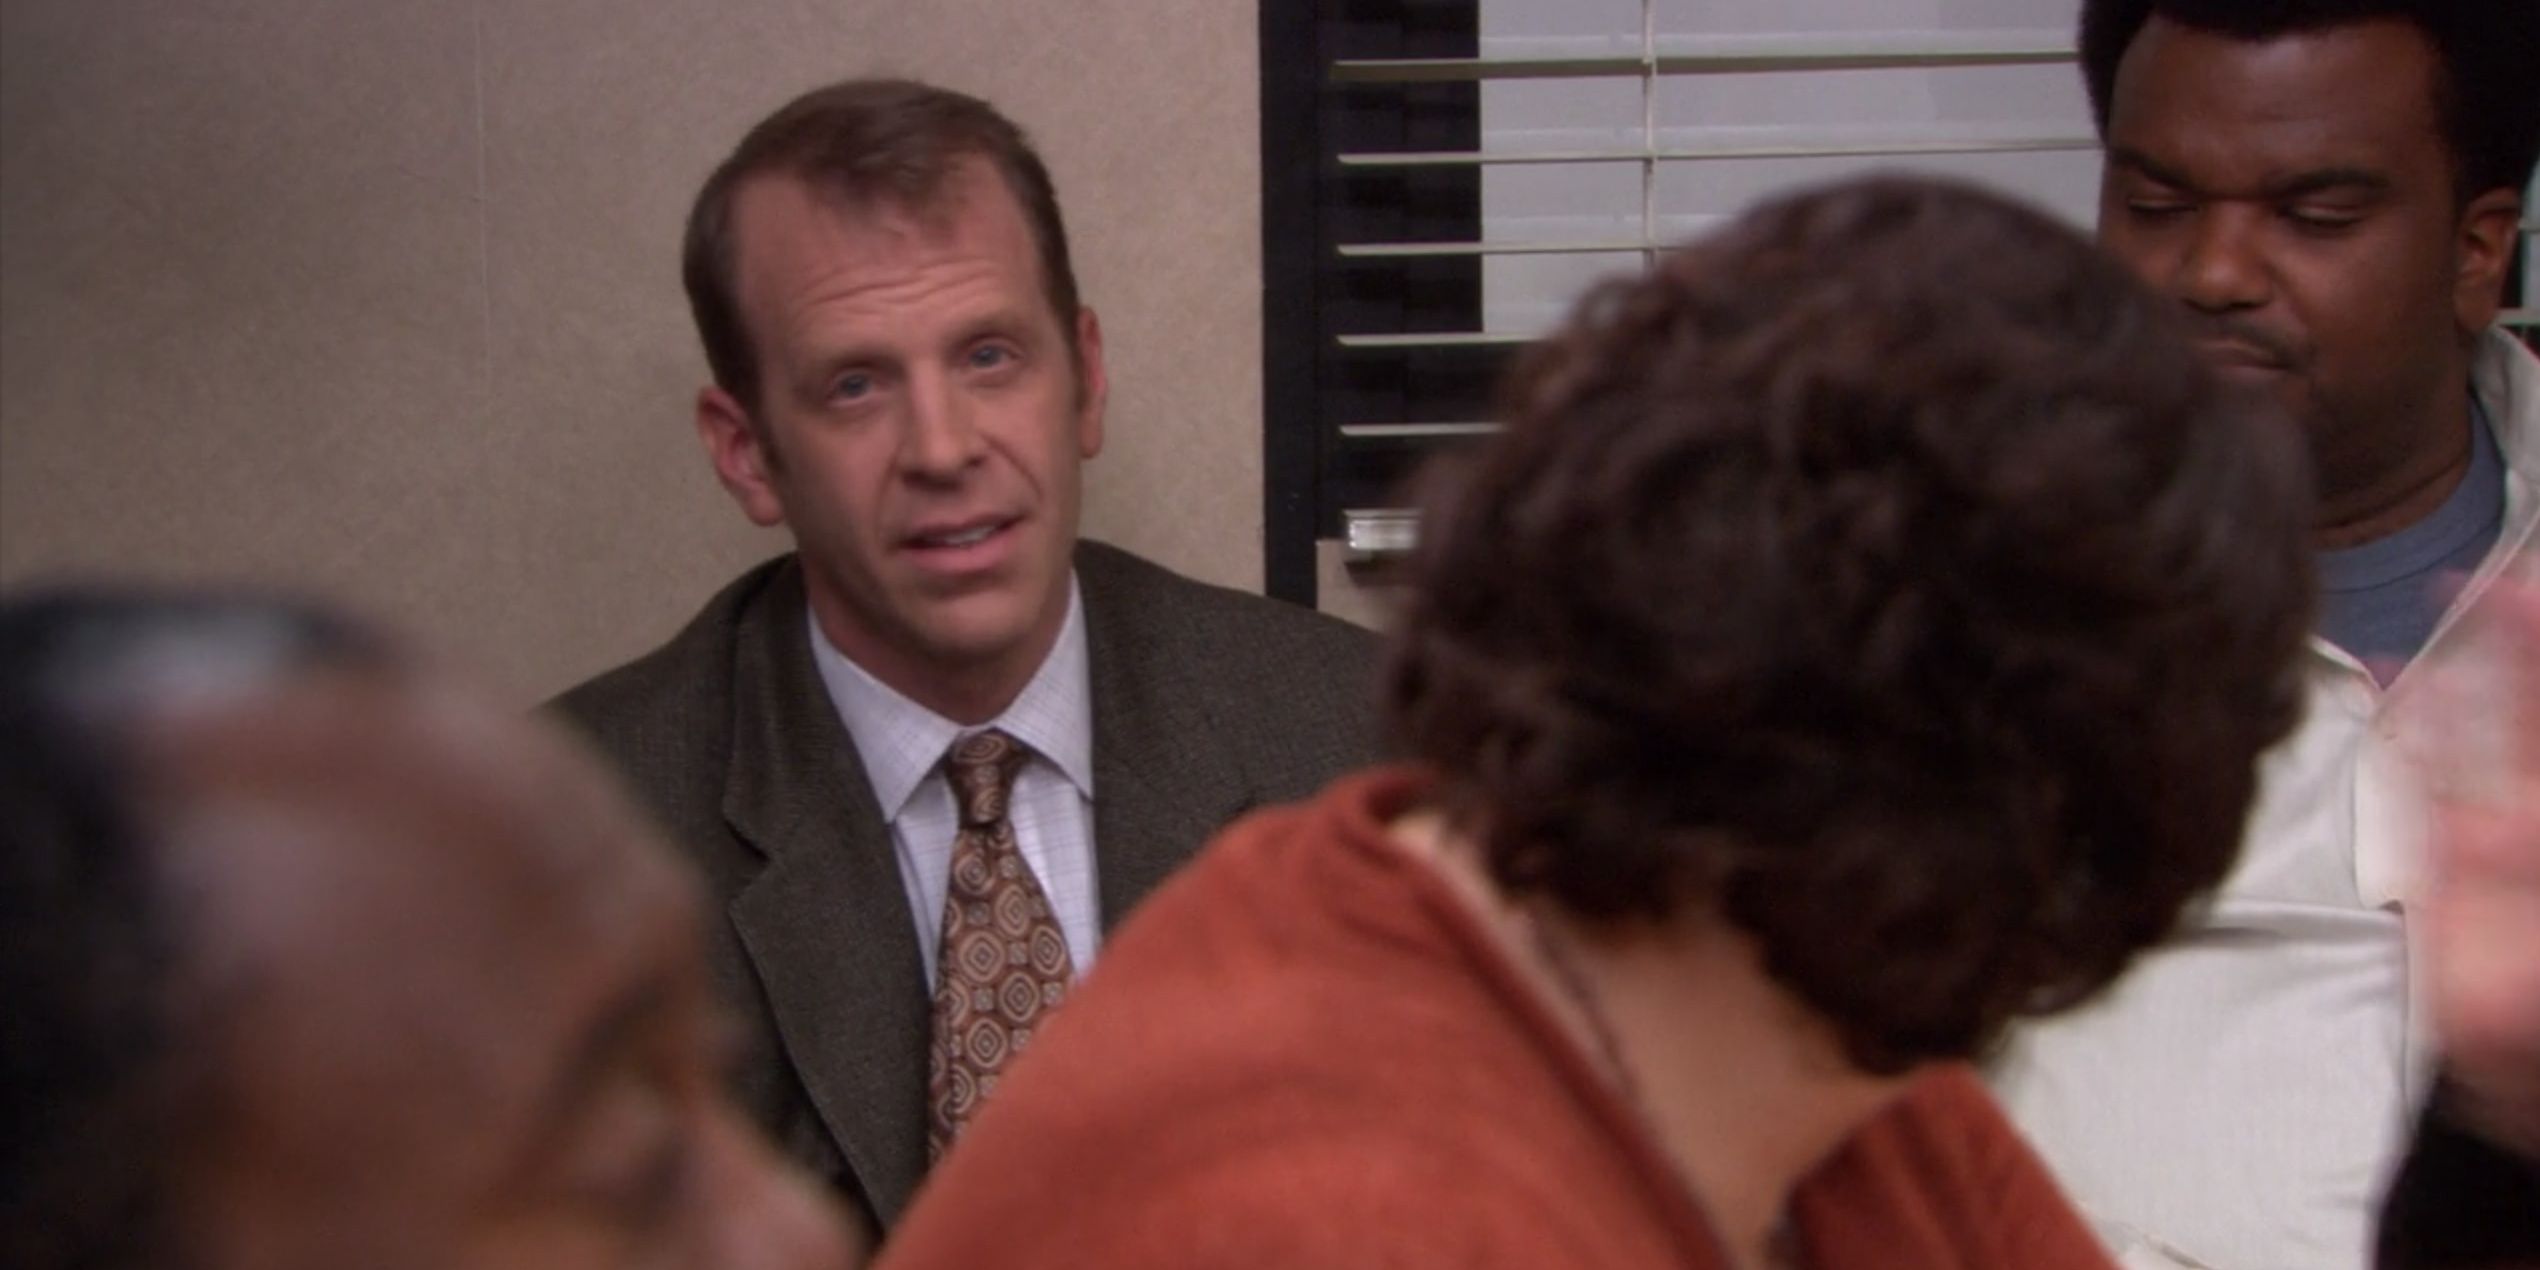 Toby speaking up in an office meeting on The Office